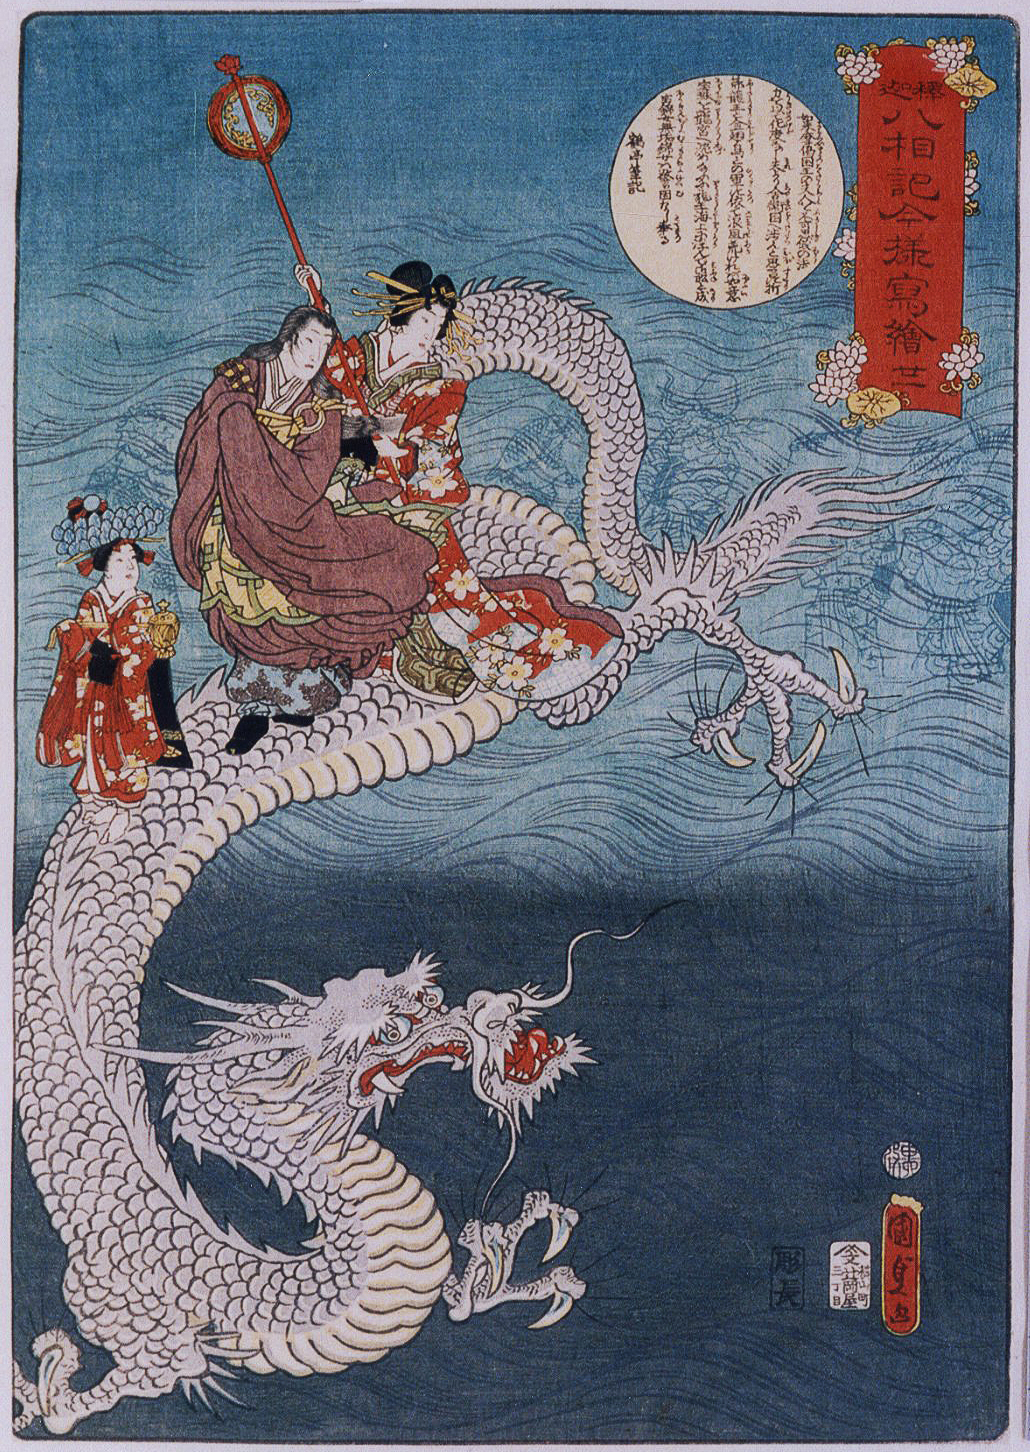 A group of three figures sit on top of a large dragon against a background of waves.